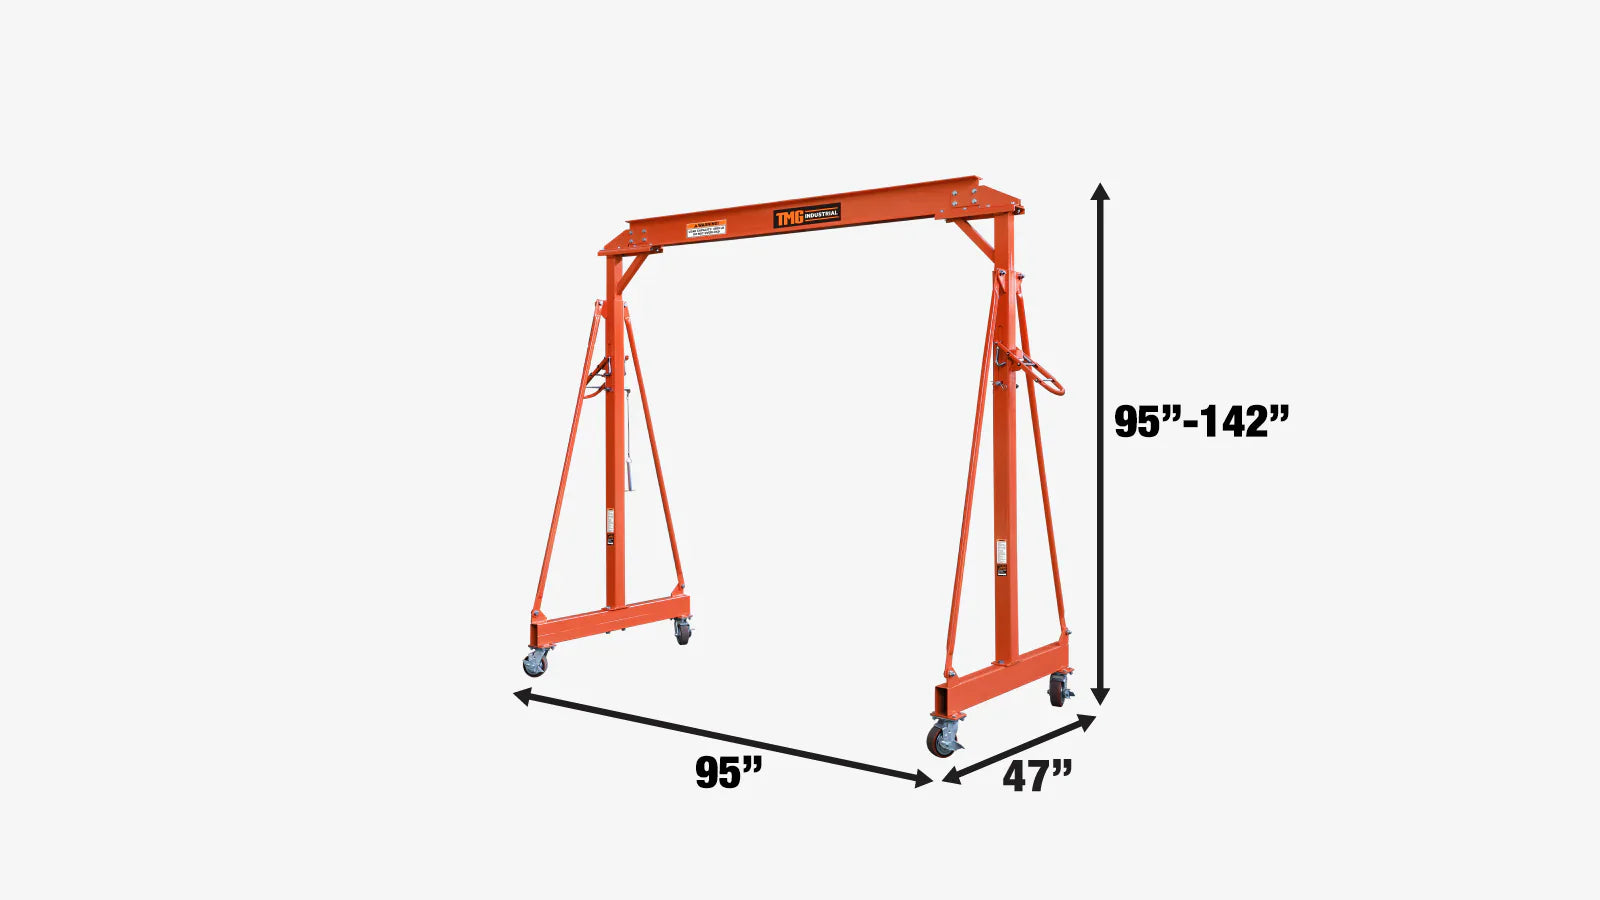 TMG Industrial 4400-lb Adjustable Height All-Steel Gantry Crane, Auto-Lock, 95” Min. Height, 142” Max. Height, Locking Swivel Caster Wheels, TMG-AGC21(Previously TMG-AGC20)-specifications-image